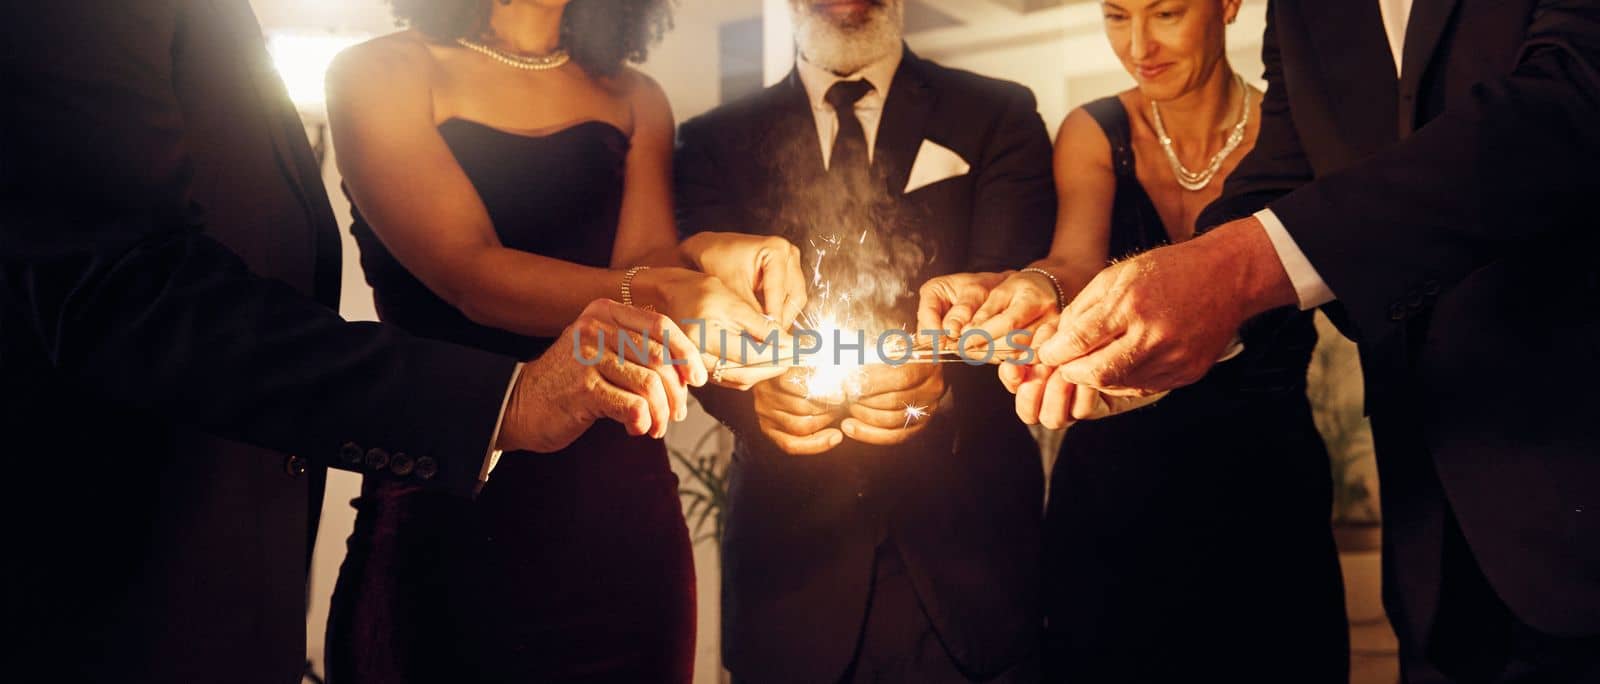 Fire, sparklers and people at a luxury party, event or celebration for new year with formal outfit. Celebrate, matches and group of friends in classy clothes at a black tie gala, banquet or dinner. by YuriArcurs